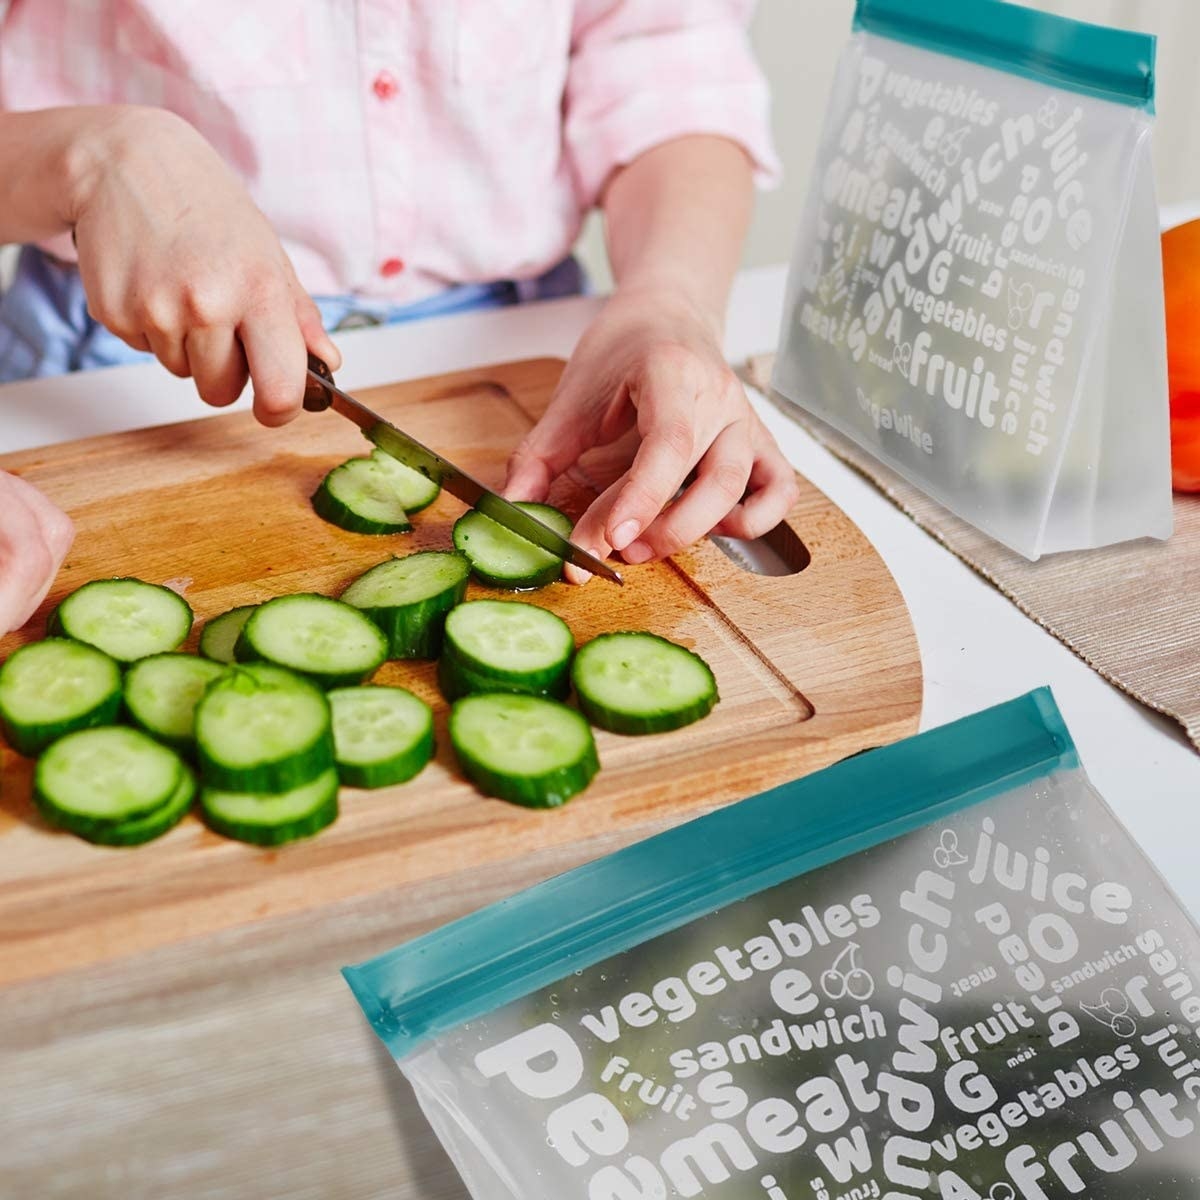 A person chopping up cucumbers and putting them in the bags